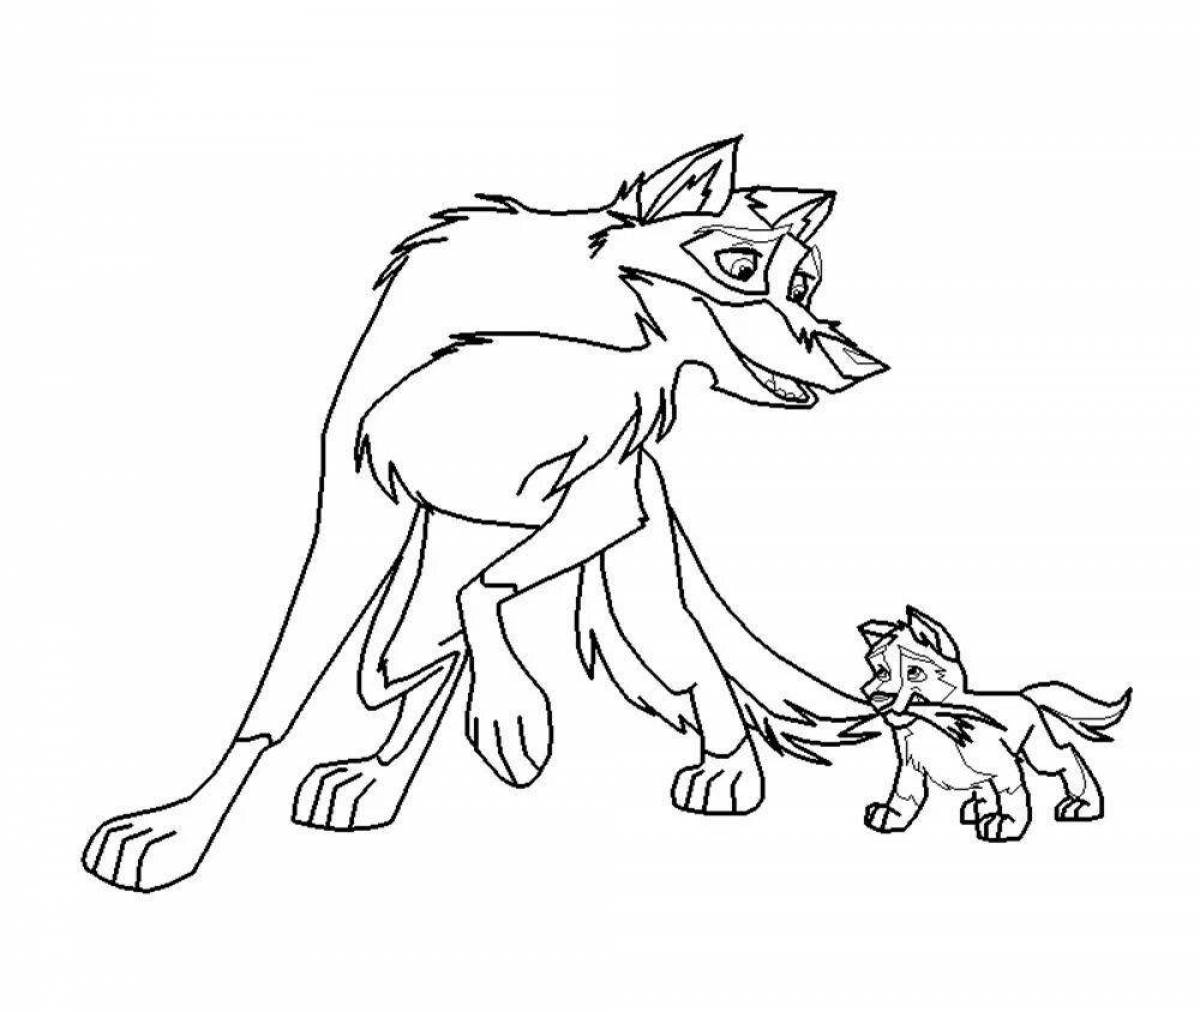 Coloring book dazzling cartoon wolf